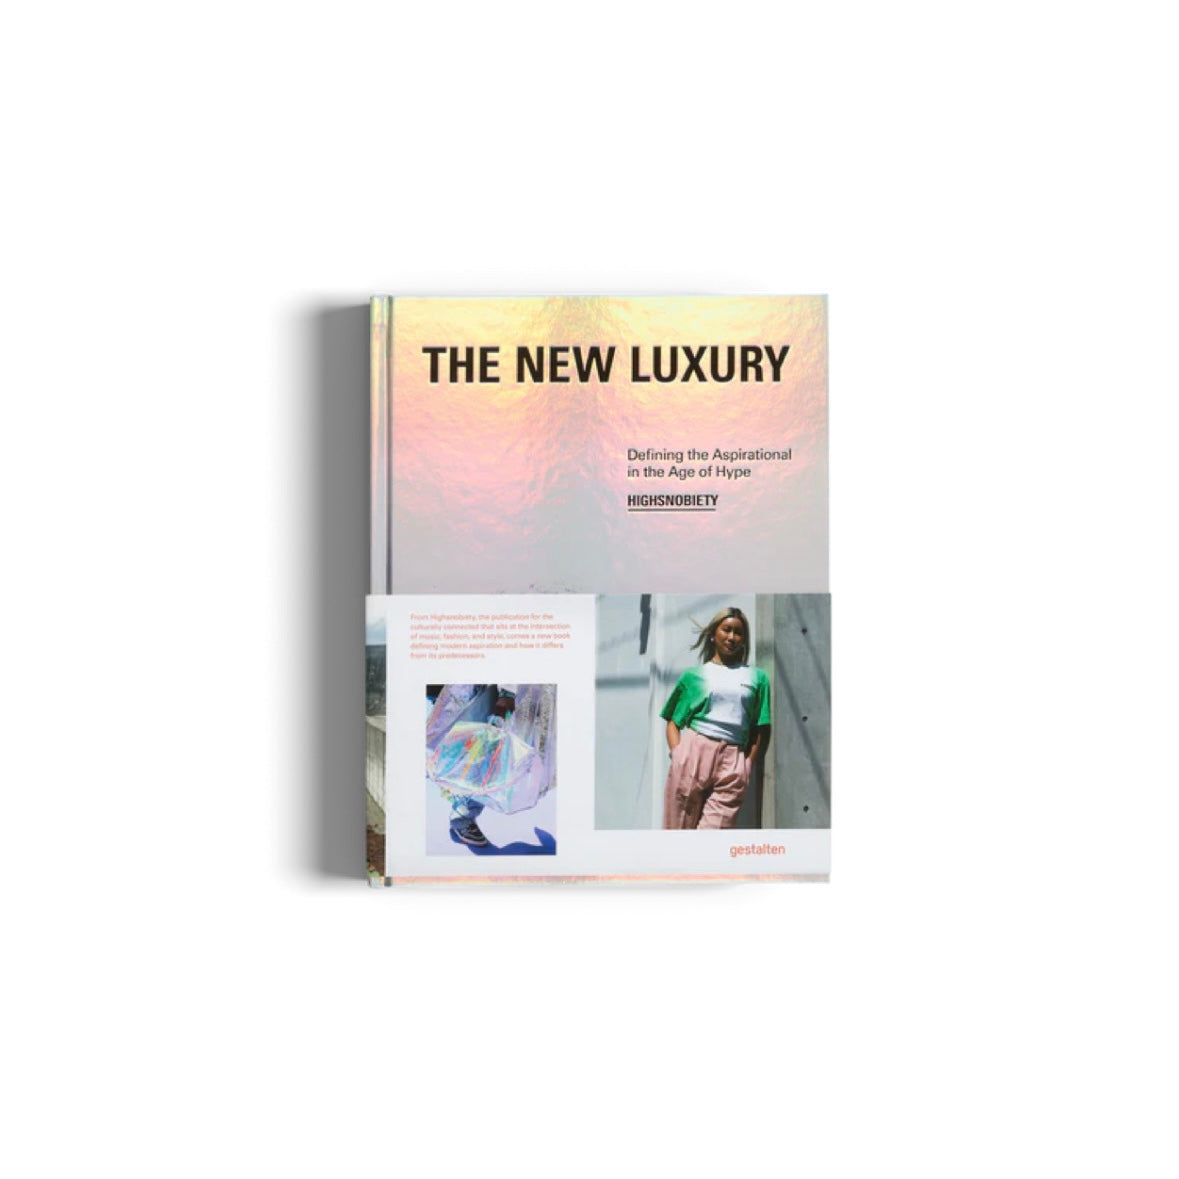 THE NEW LUXURY : DEFINING THE ASPIRATIONAL IN THE AGE OF HYPE